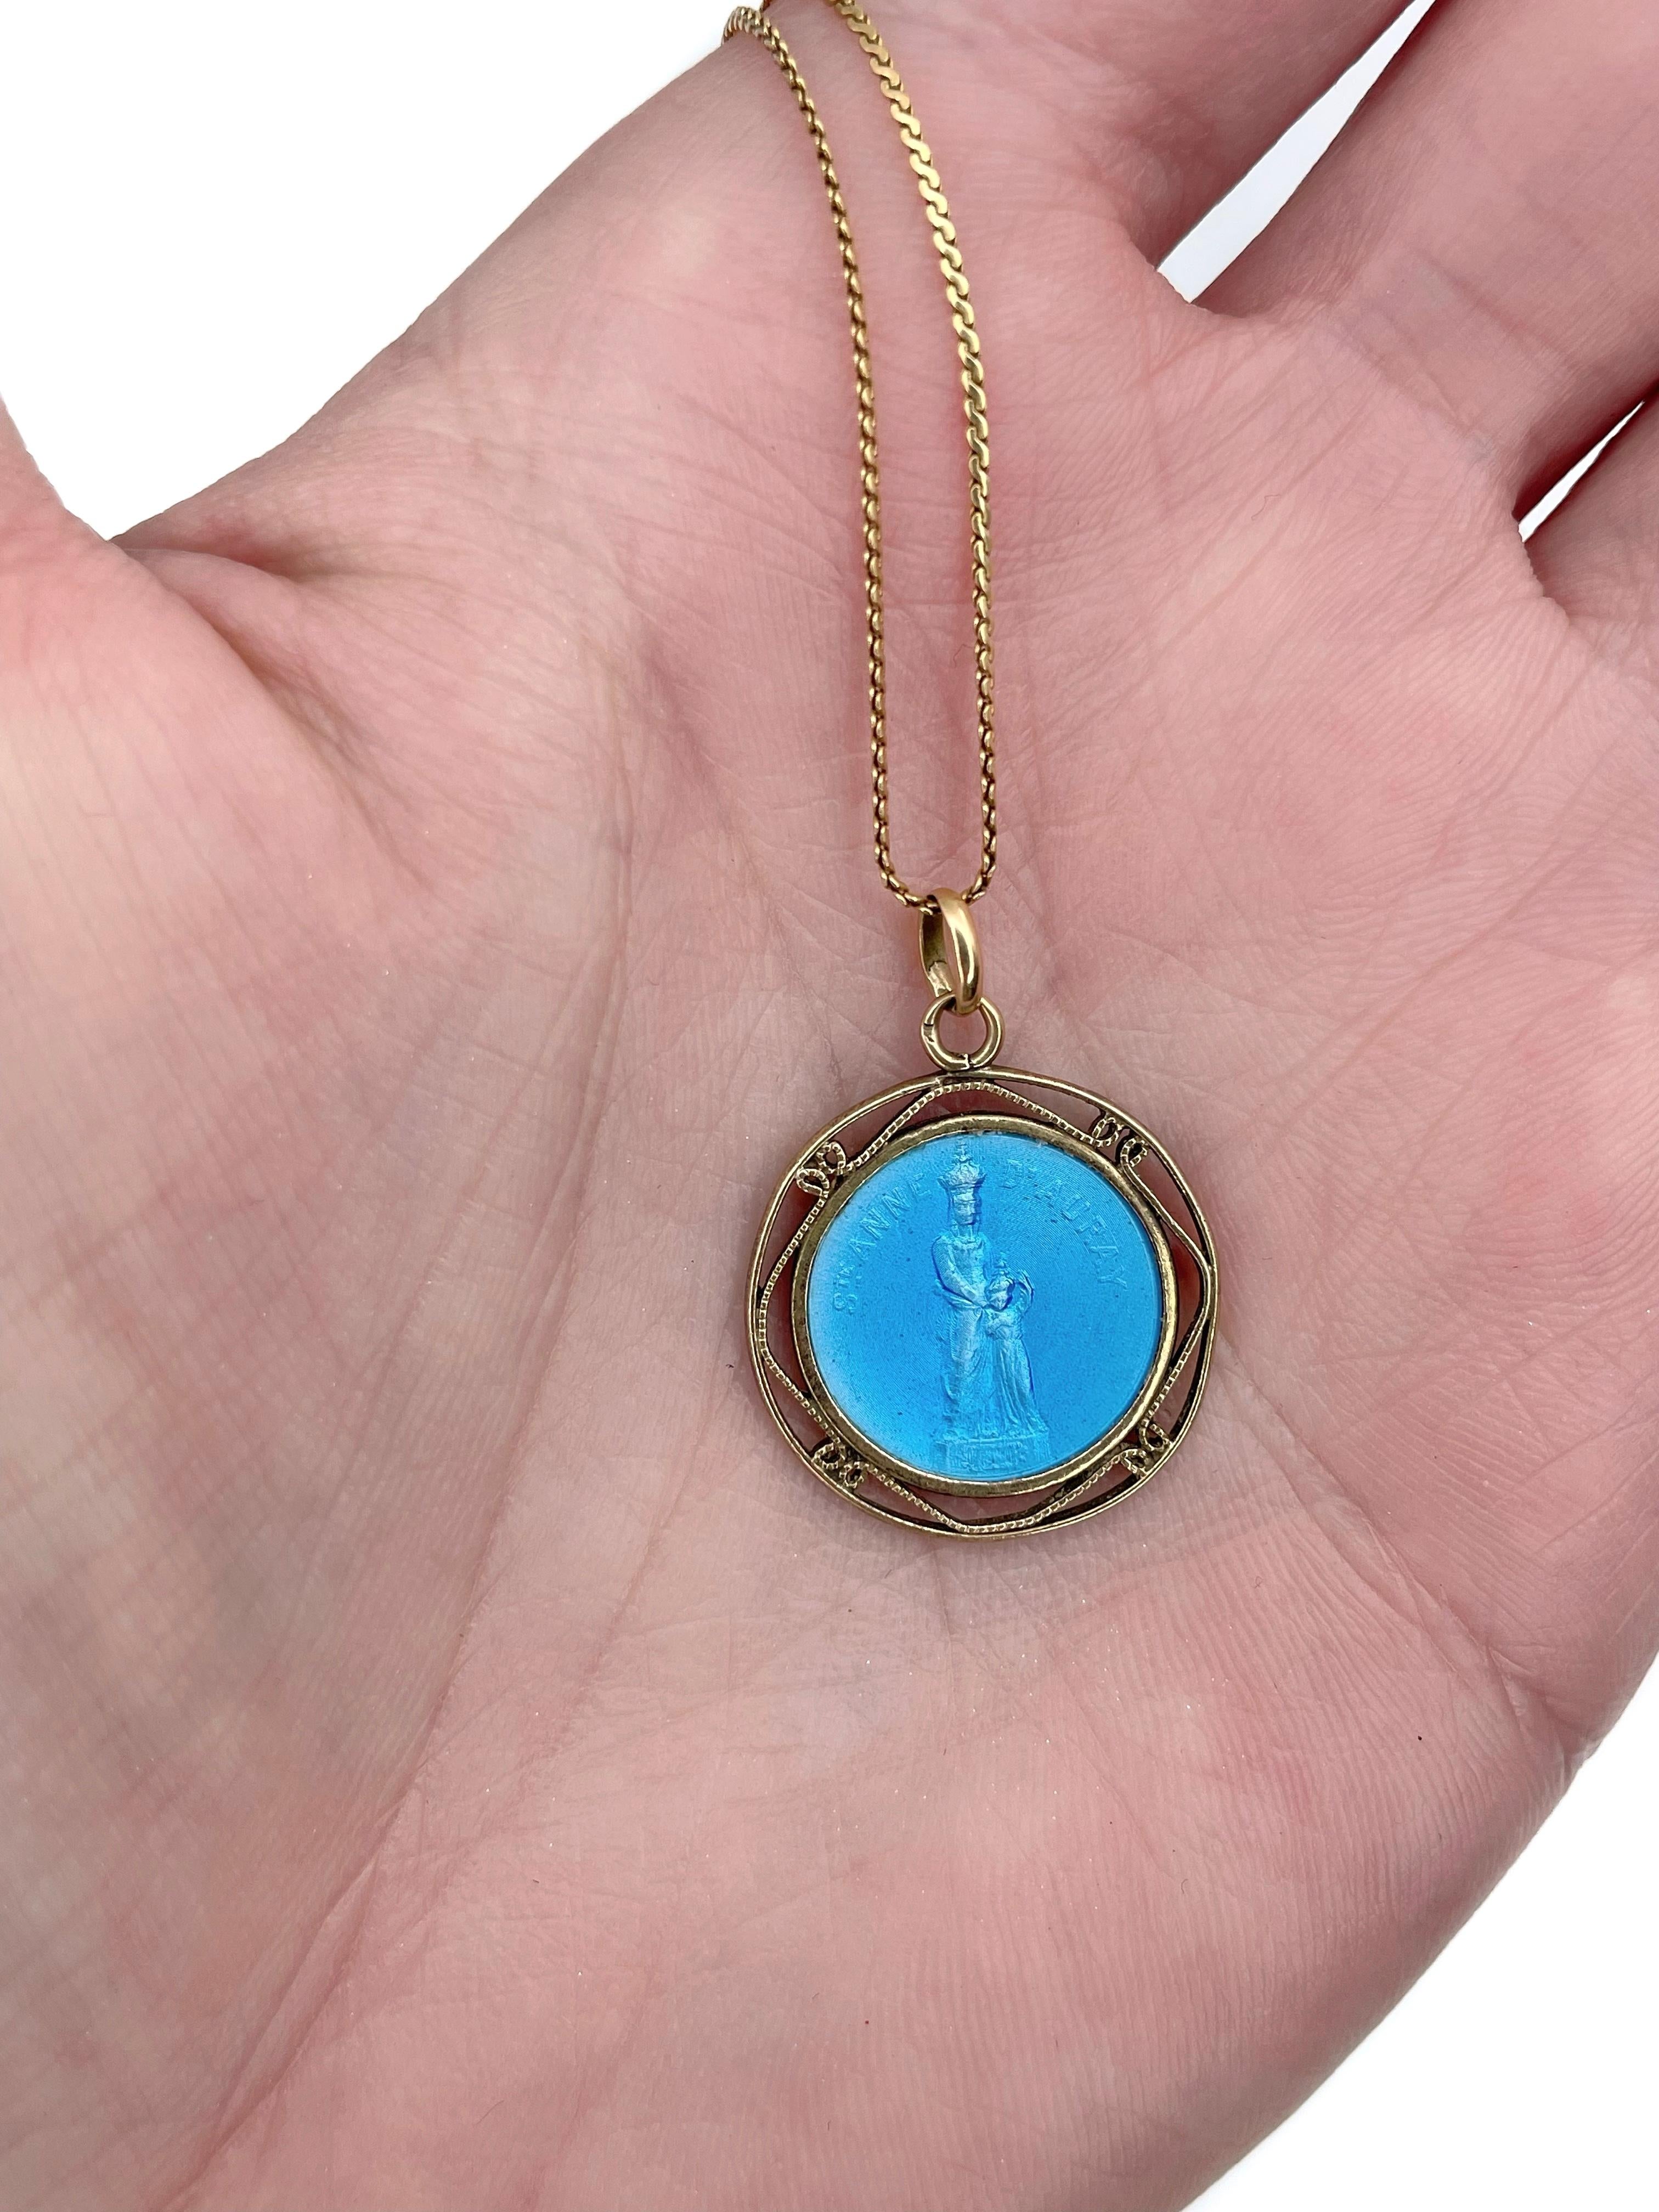 This is a vintage St. Anne D’Auray religious pendant with a chain. It is crafted in 18K yellow gold. Circa 1960. 

The piece features blue enamel. 

Weight: 5.15g
Pendant size: 2.5x1.9cm
Chain length: 52.5cm 

———

If you have any questions, please